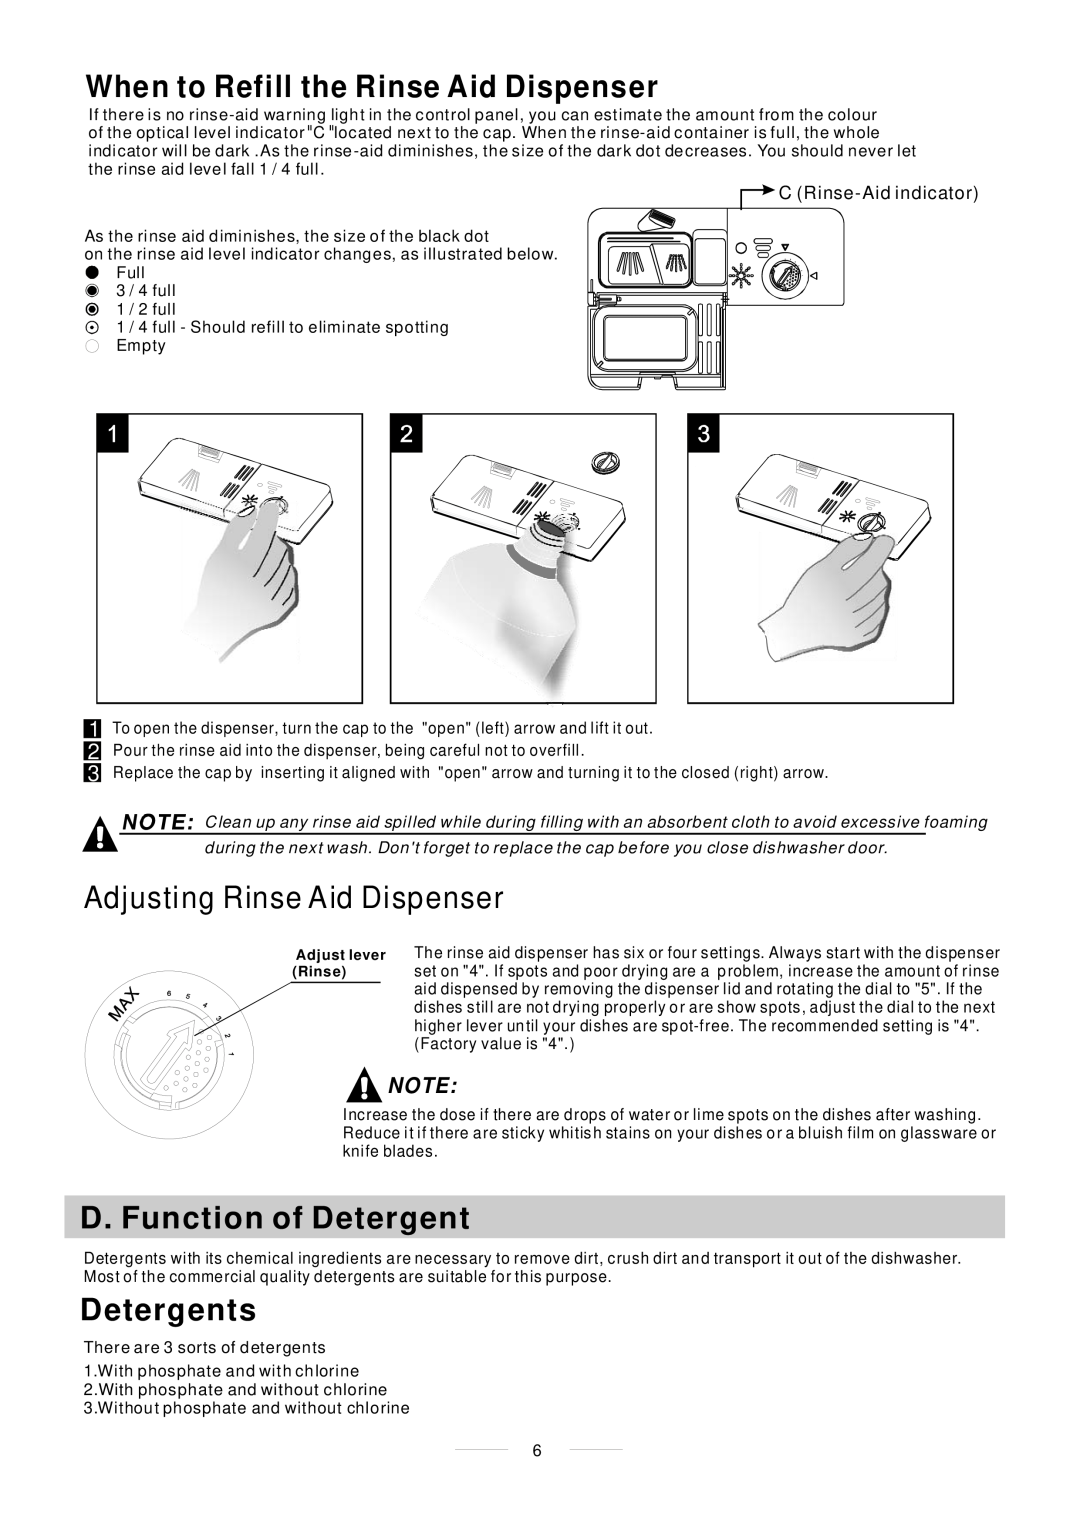 Whirlpool ADP 750 manual When to Refill the Rinse Aid Dispenser, Adjusting Rinse Aid Dispenser, D. Function of Detergent 